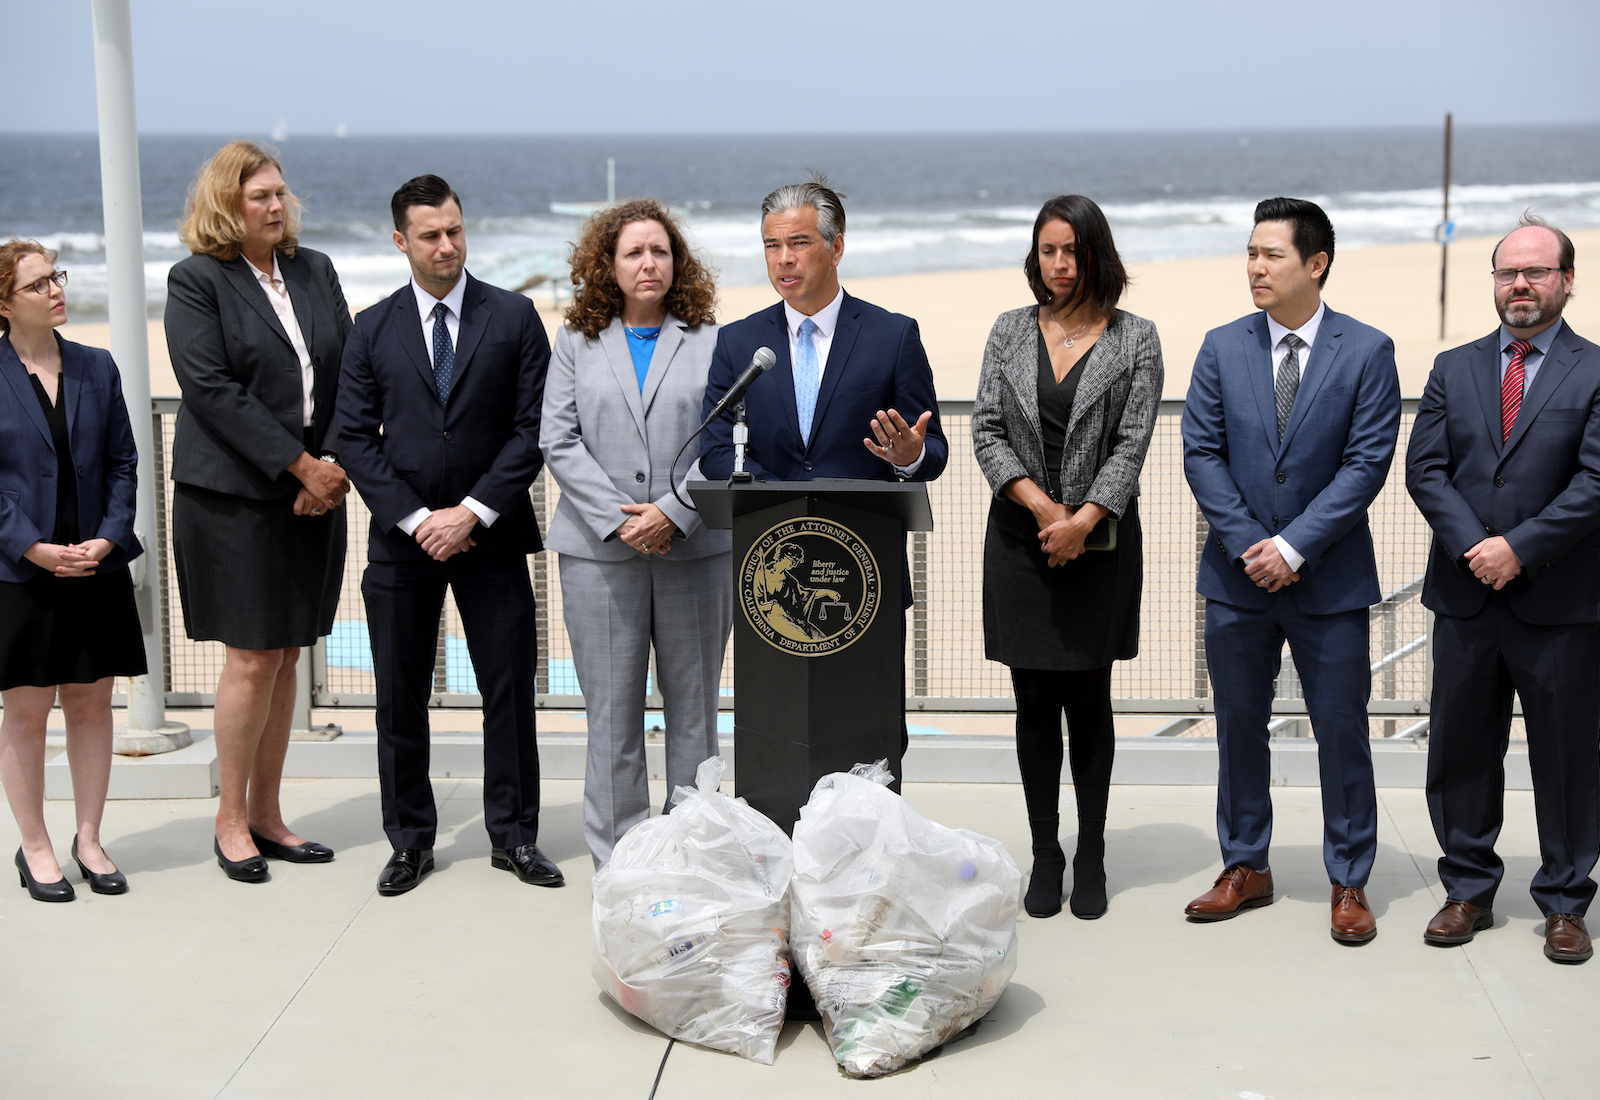 Attorney General Bonta speaks, surroundd by staff and with two garbage bags in front of him